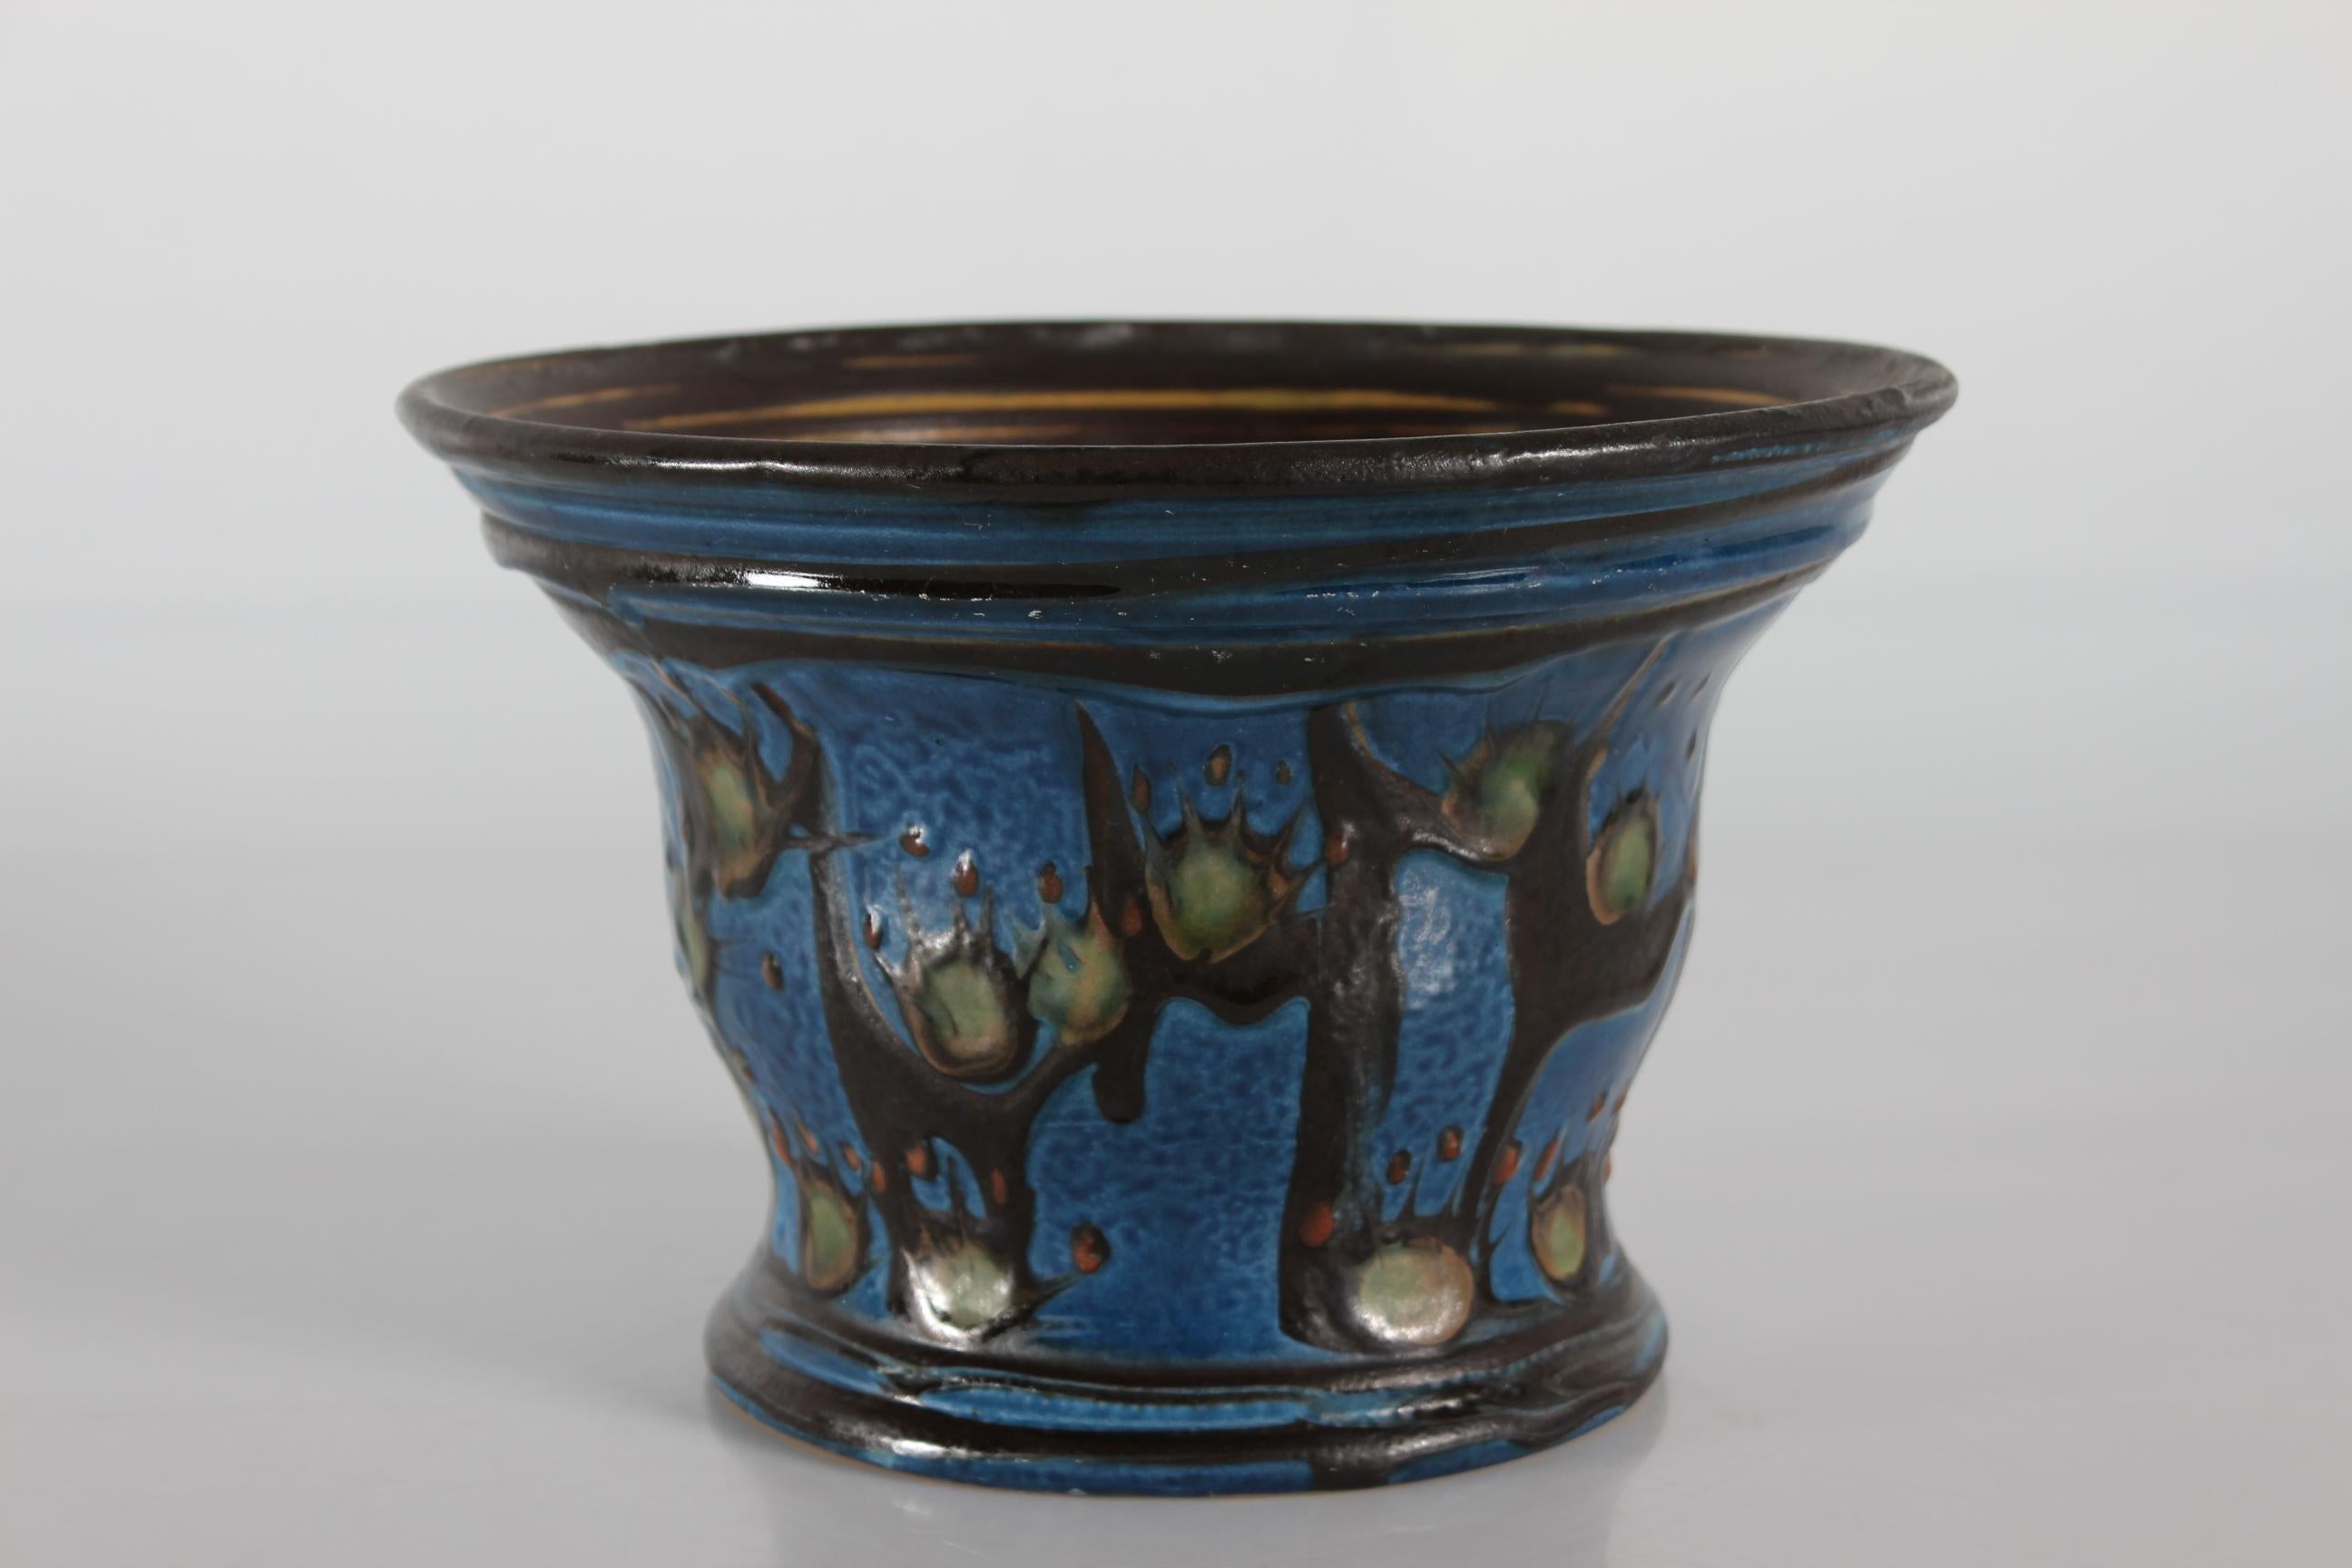 Art Nouveau ceramic flowerpot made by Herman A. Kähler ceramic works in Denmark in the period 1925-1935
The flowerpot is decorated by hand with the special cow horn technique. The glaze is dark blue, rust brown, green and black.

Sign. HAK 

Nice